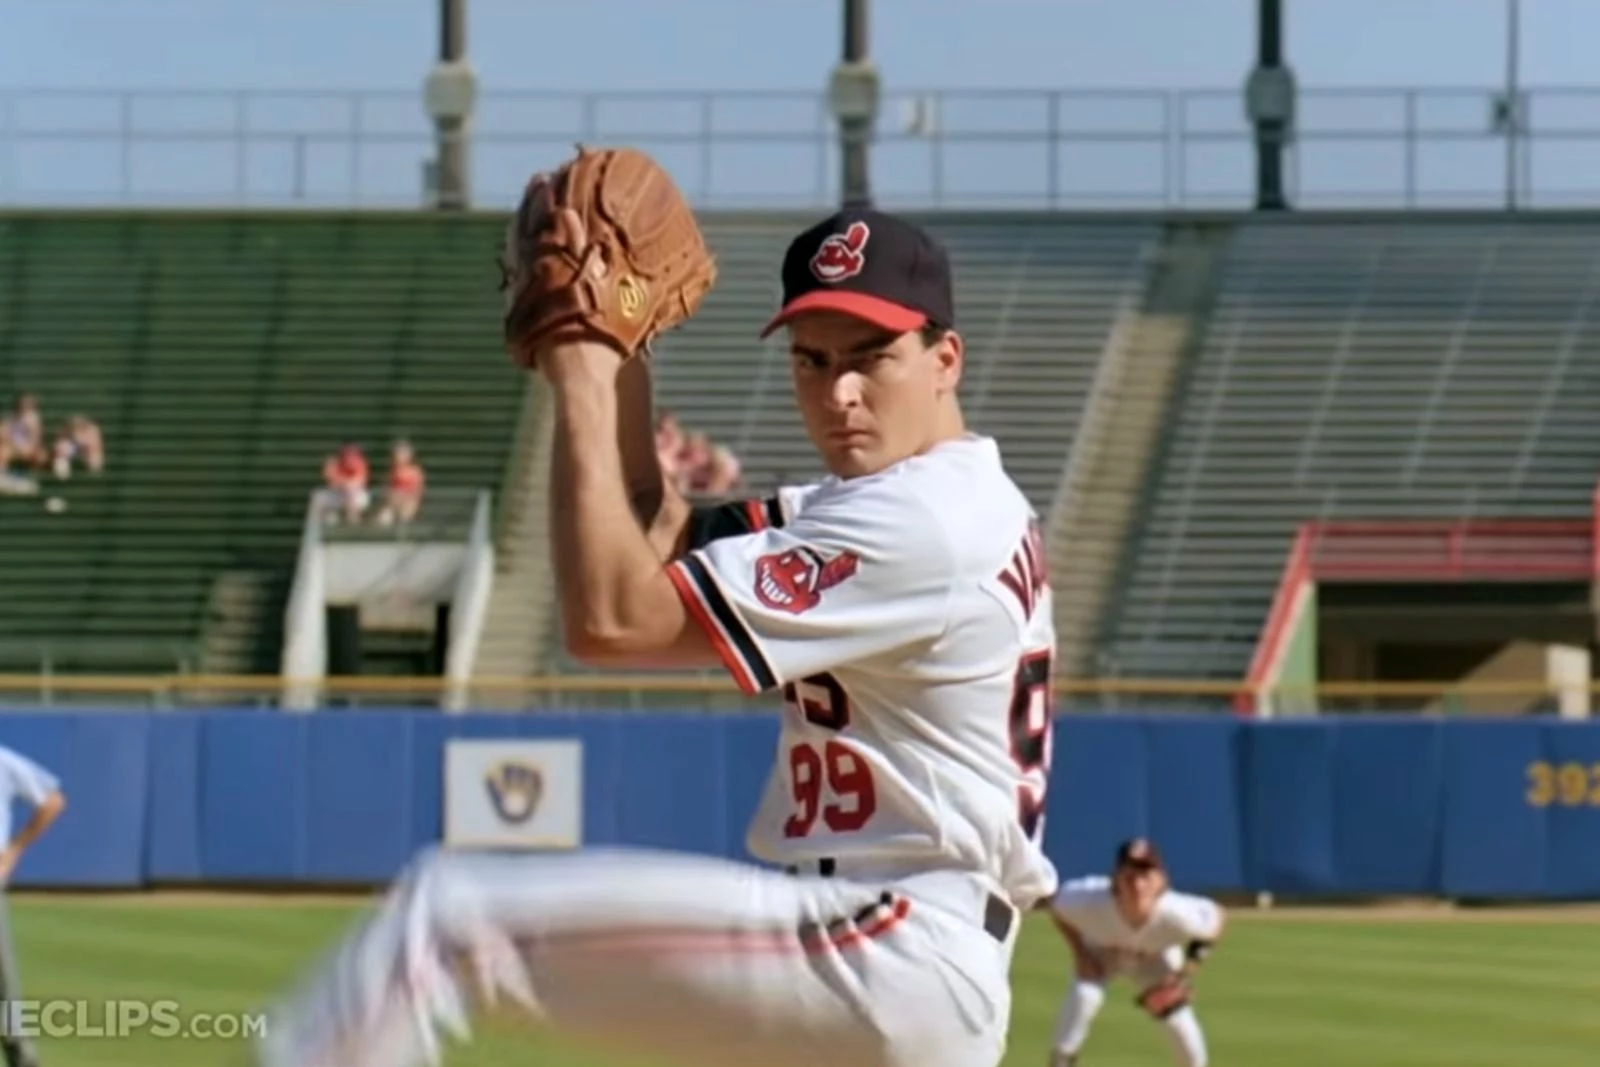 Charlie Sheen Did Steroids for 'Major League,' He Tells Sports